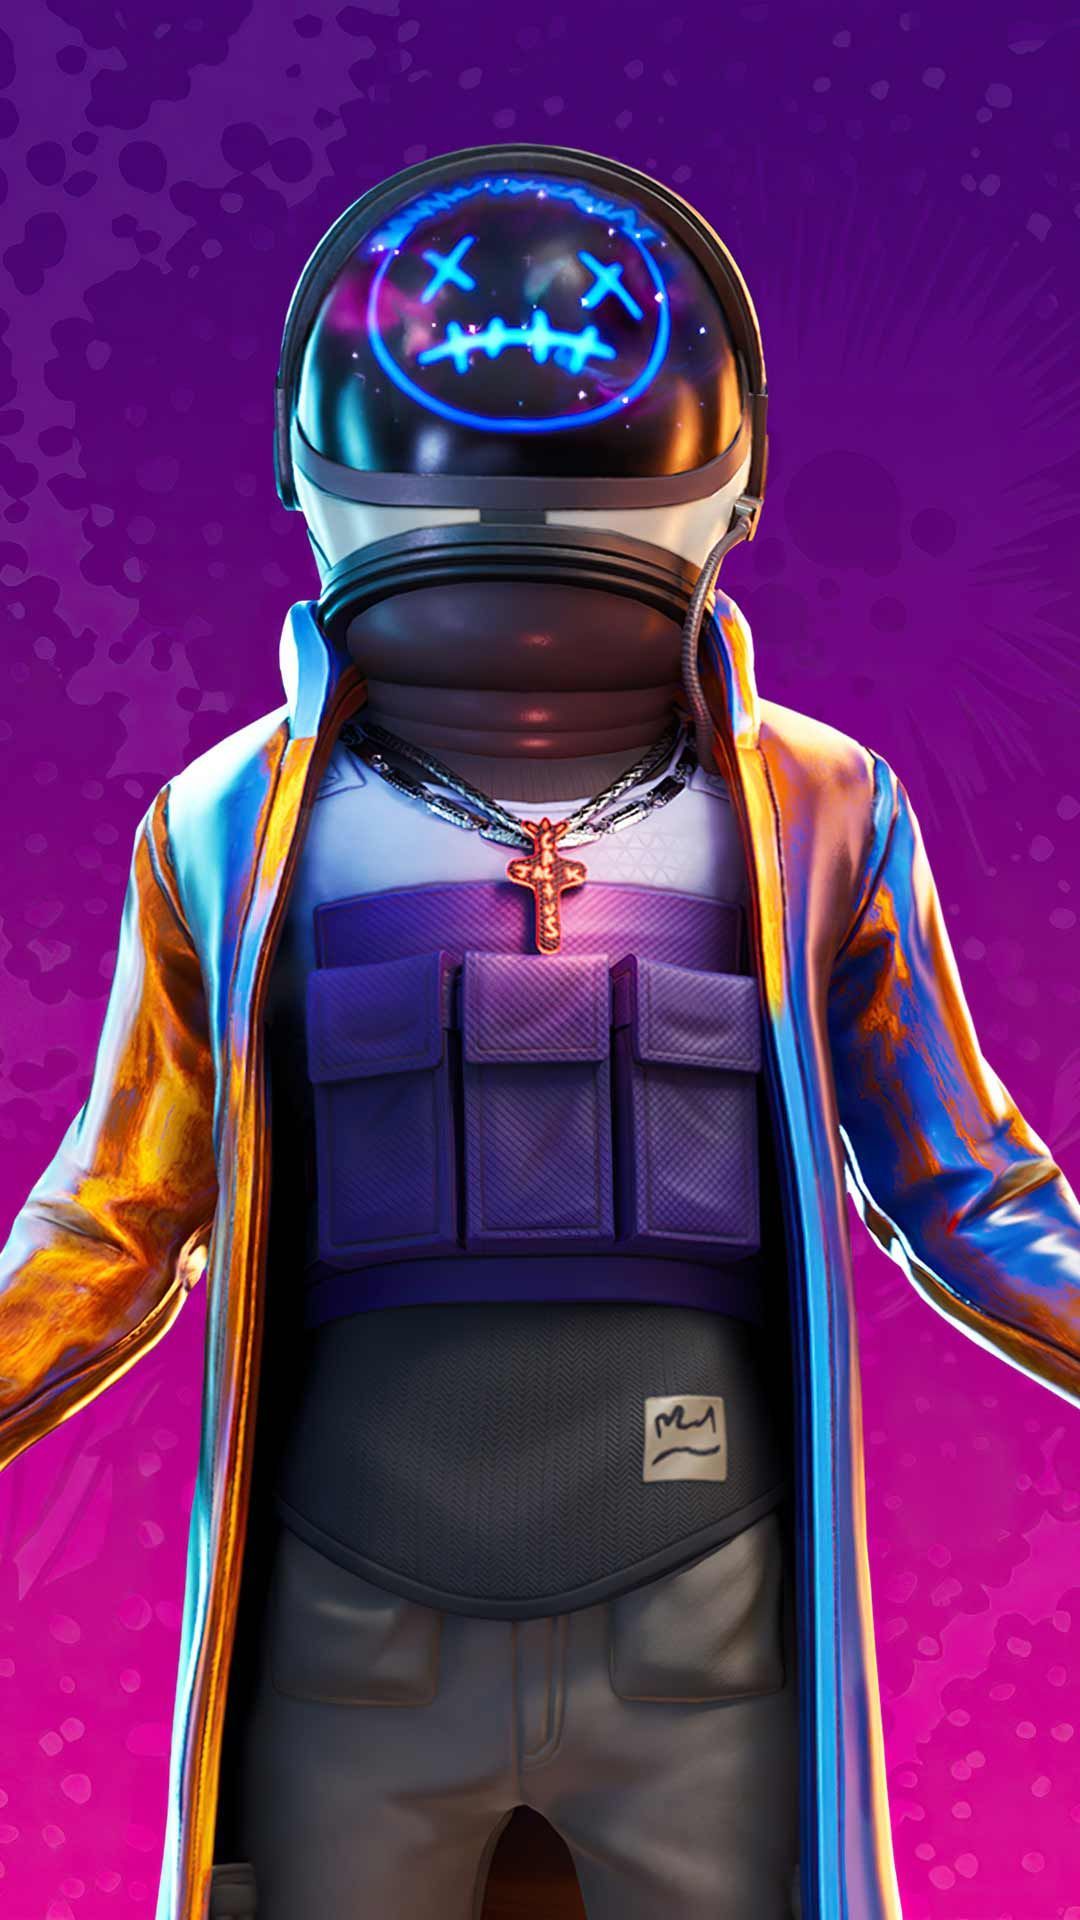 Astro jack fortnite skin wallpaper HD phone background art Poster for iPhone android home scree. HD phone background, Cellphone background, HD wallpaper android